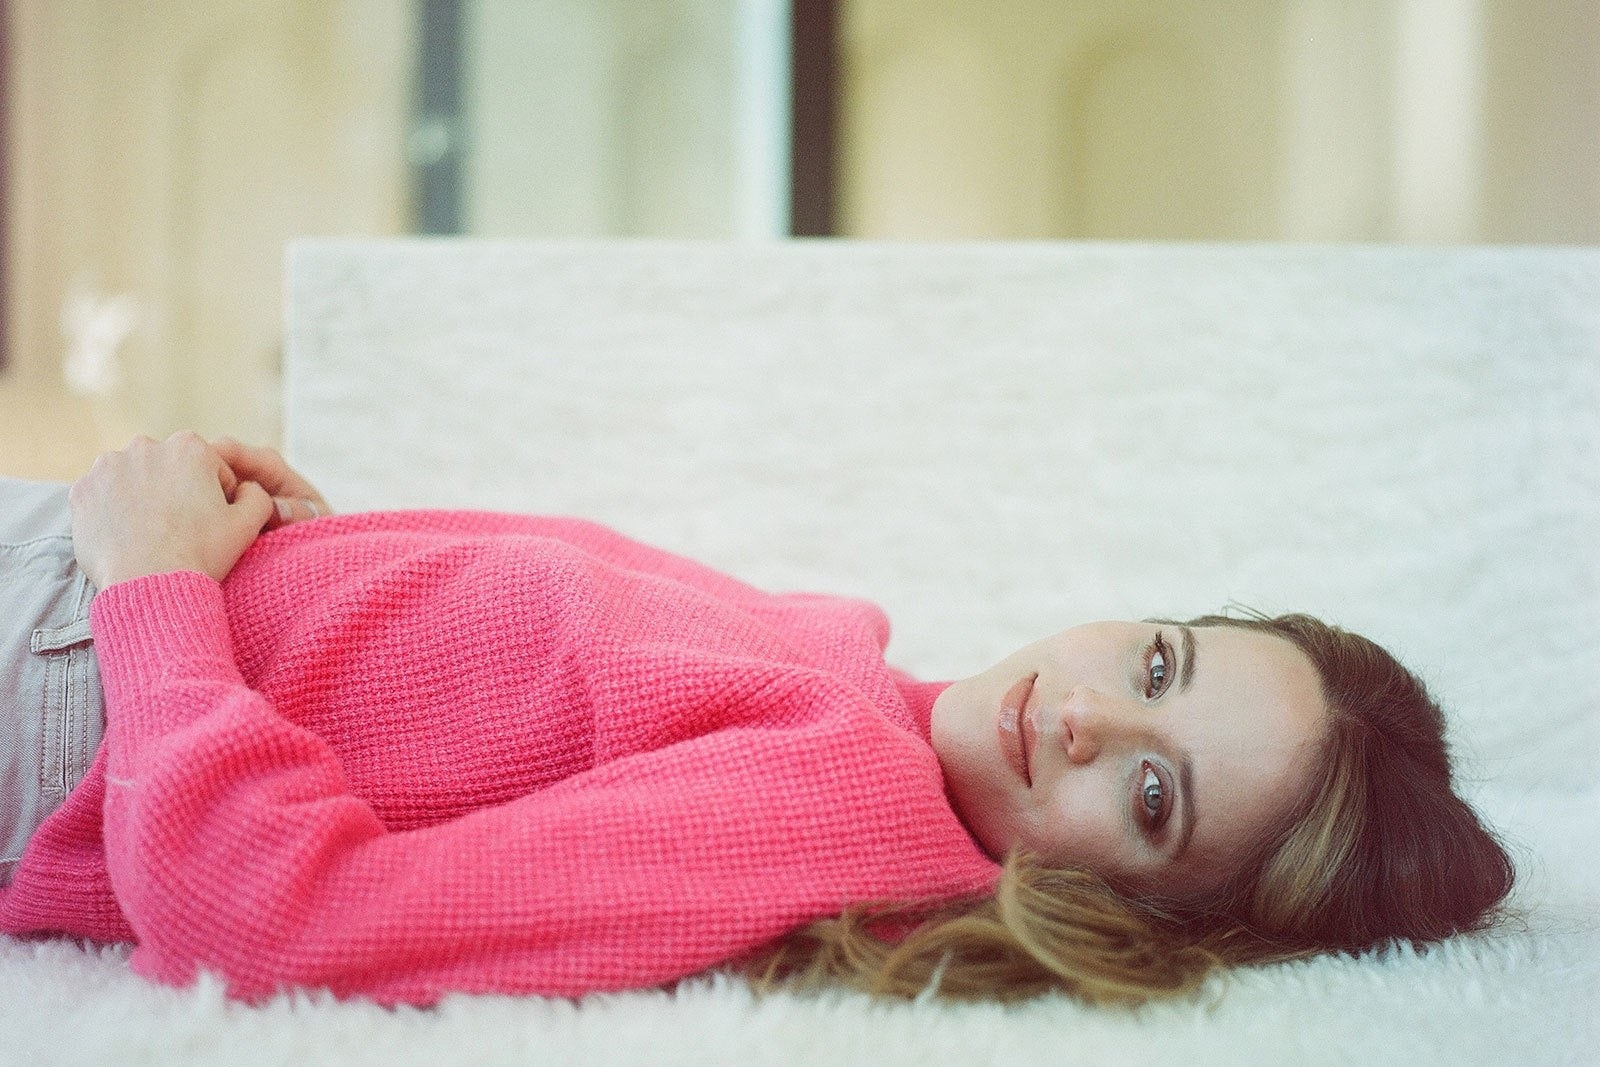 Vuolo lying down on white carpet in a bright pink sweater